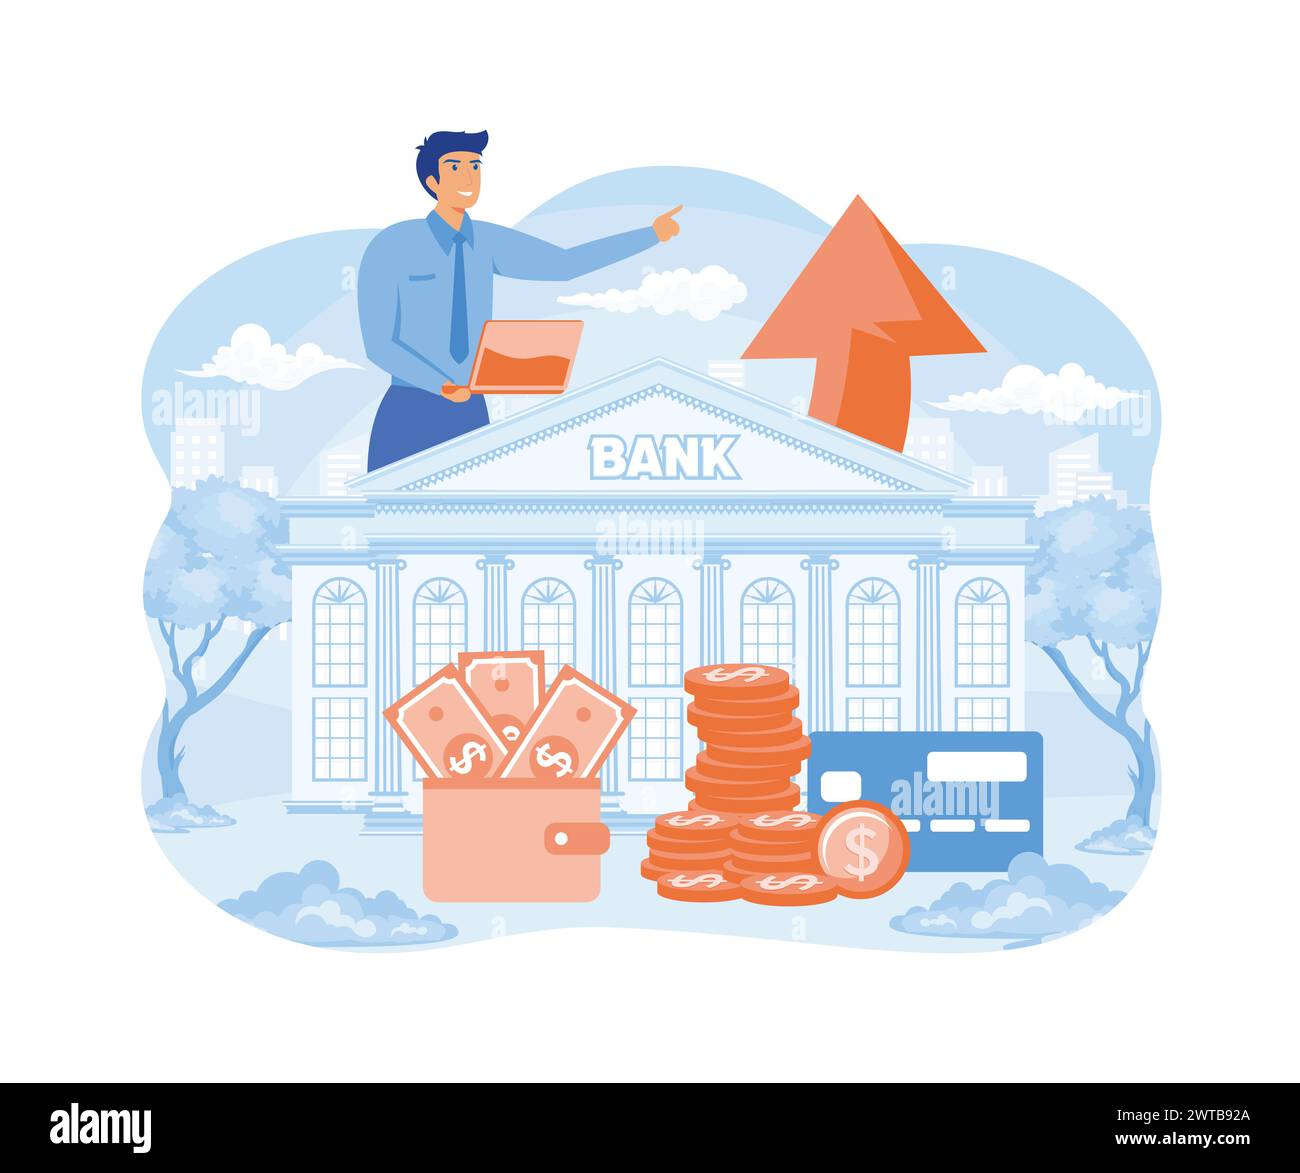 Searching Business Loan Offer, Bank Investments Proposal, Refinancing Opportunity. Businessman, Business Owner with Laptop, Bank Building, Money in Wa Stock Vector